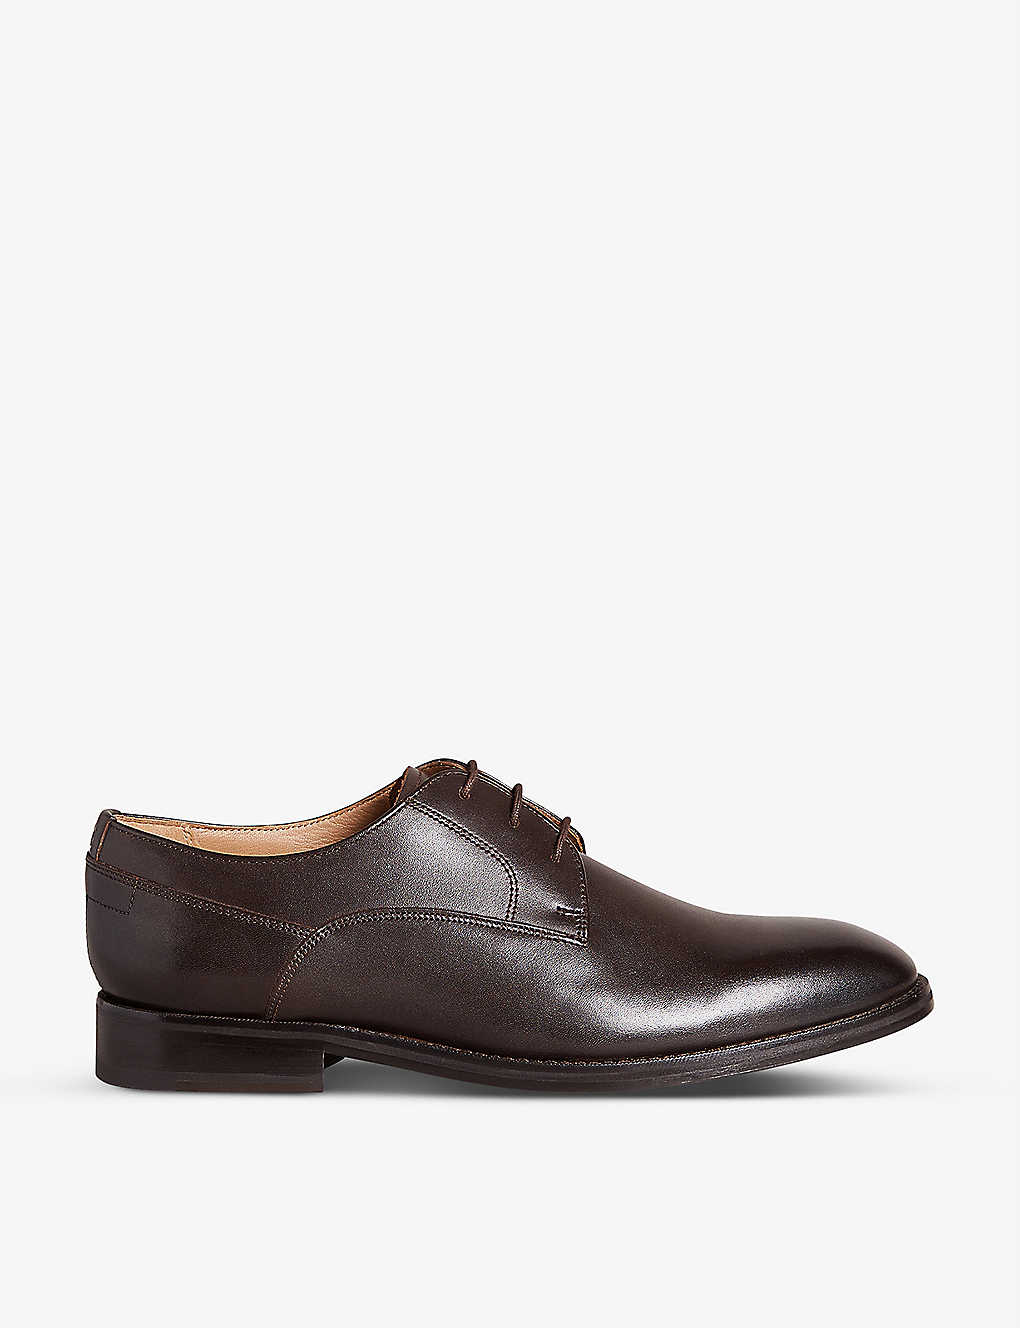 Ted Baker Mens Brown Formal Leather Derby Shoes